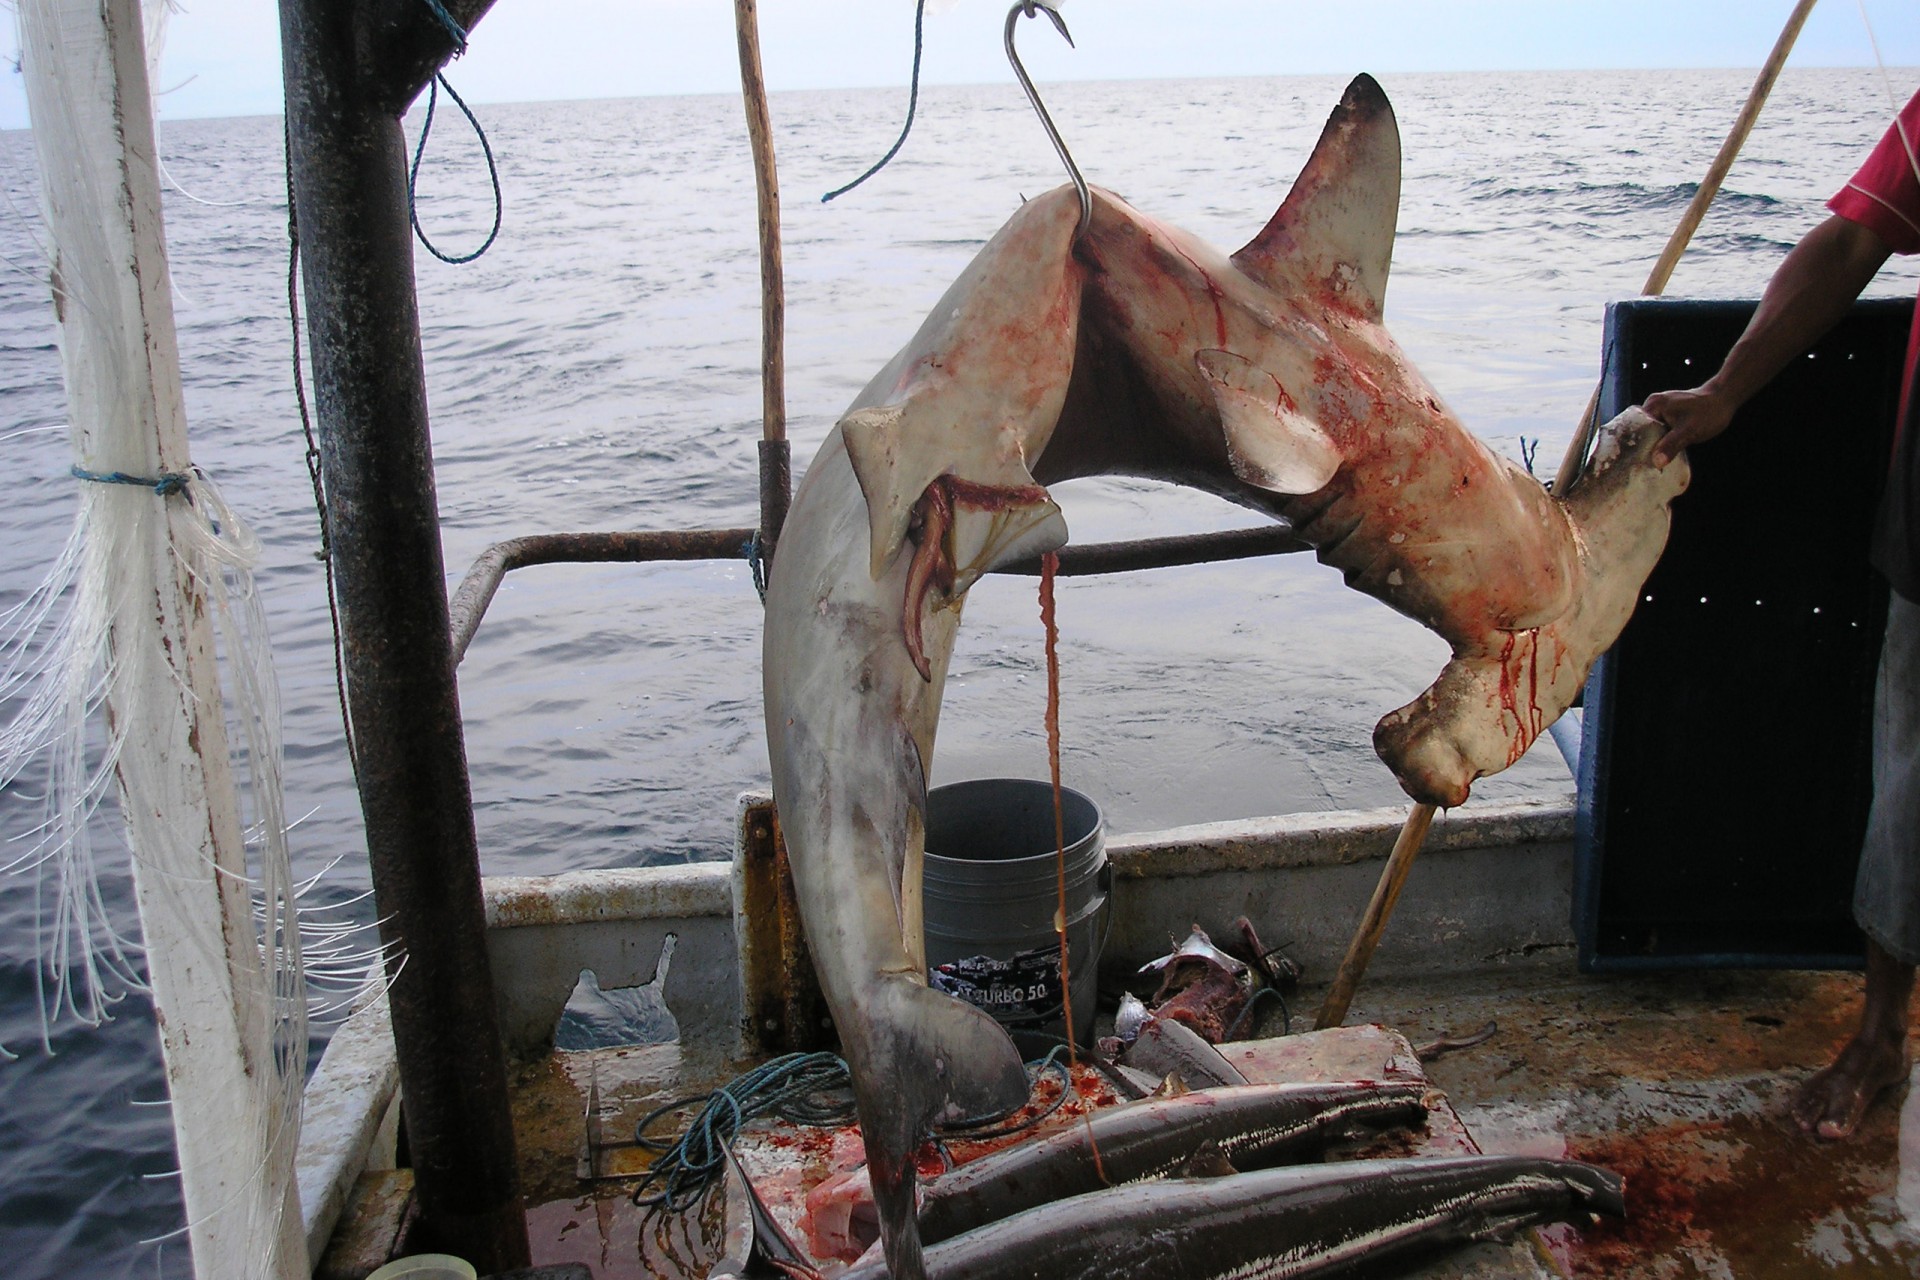 Fishing exclusion zones to help manage shark populations in Pacific Panama